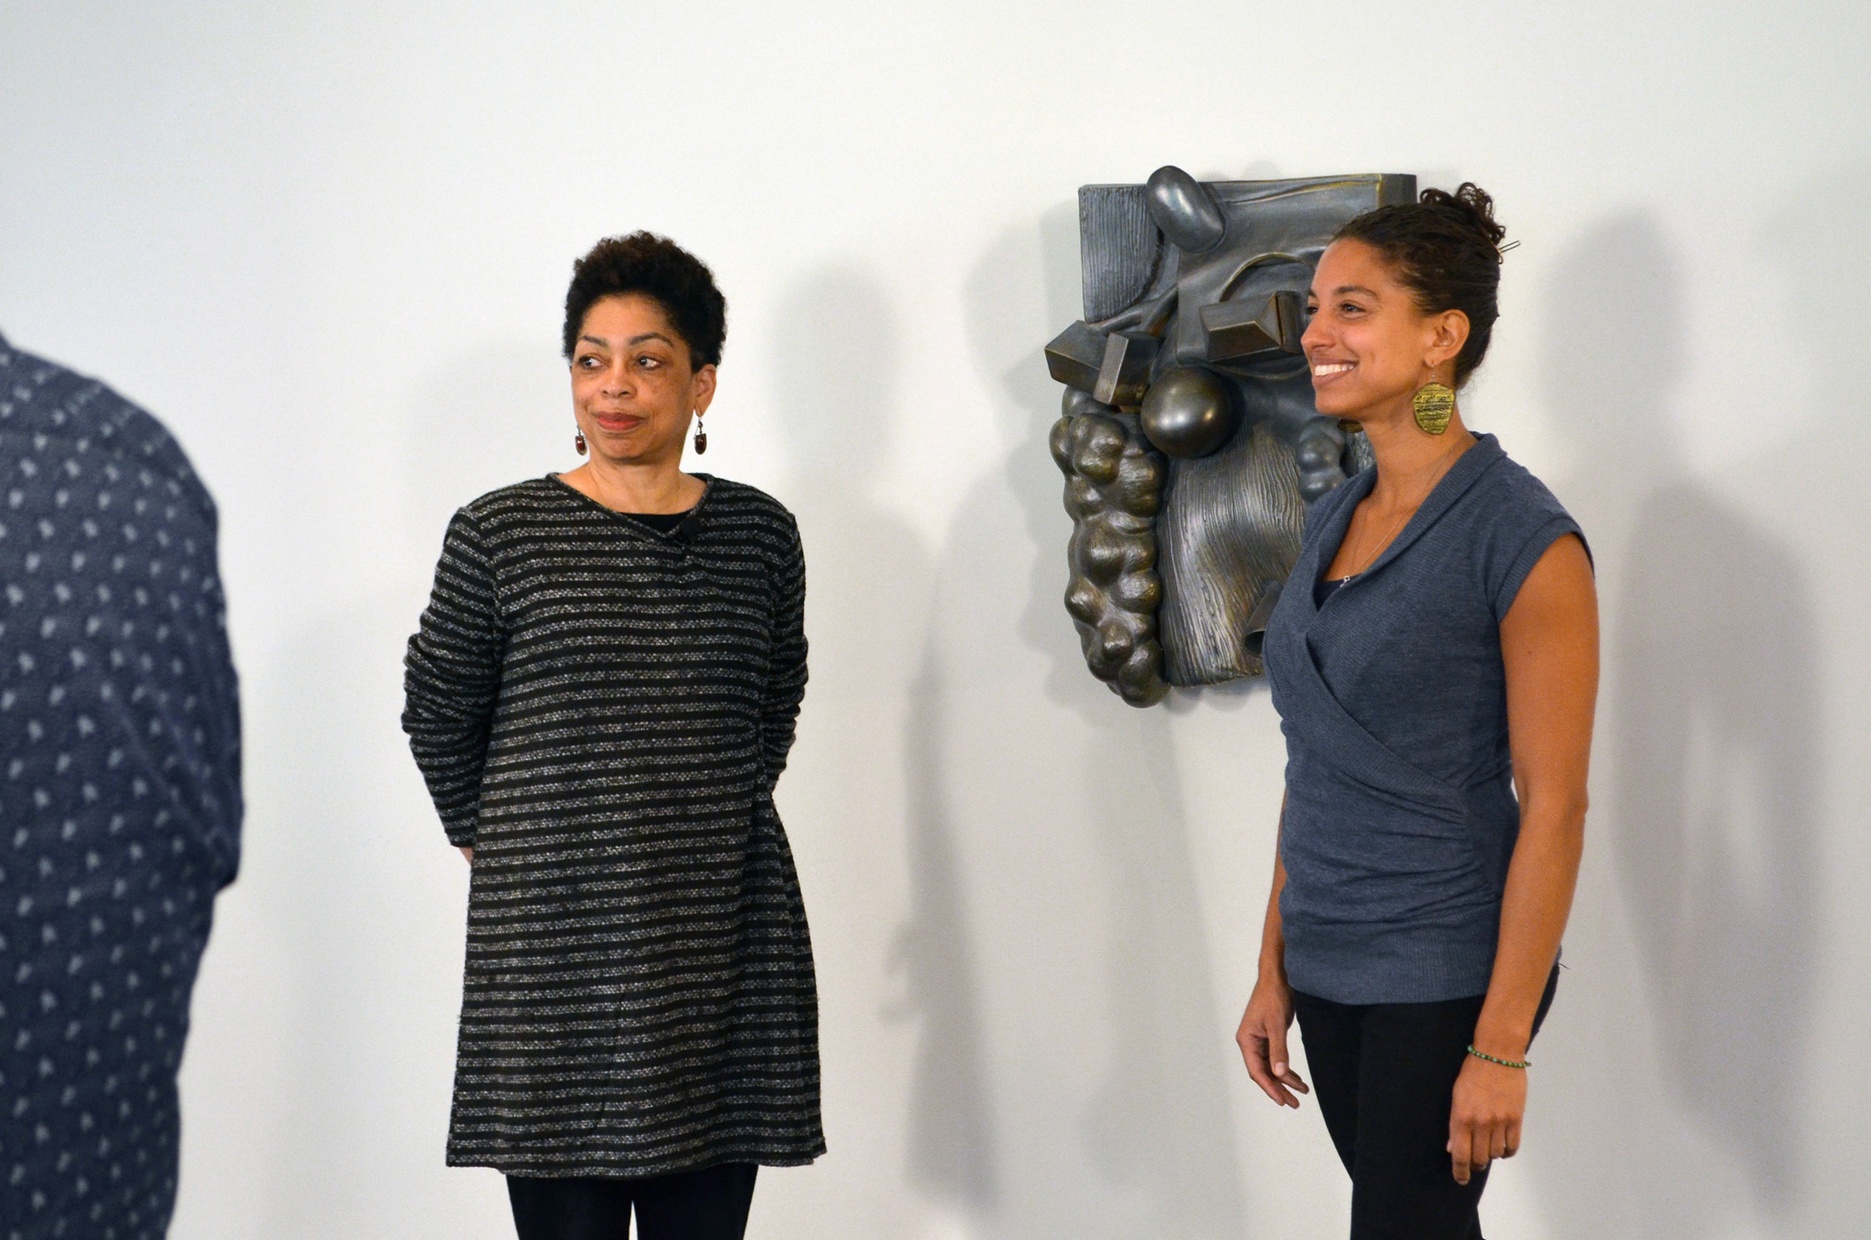 Syd Carpenter stands to the left of her sculpture, mounted on the wall behind Leah penniman